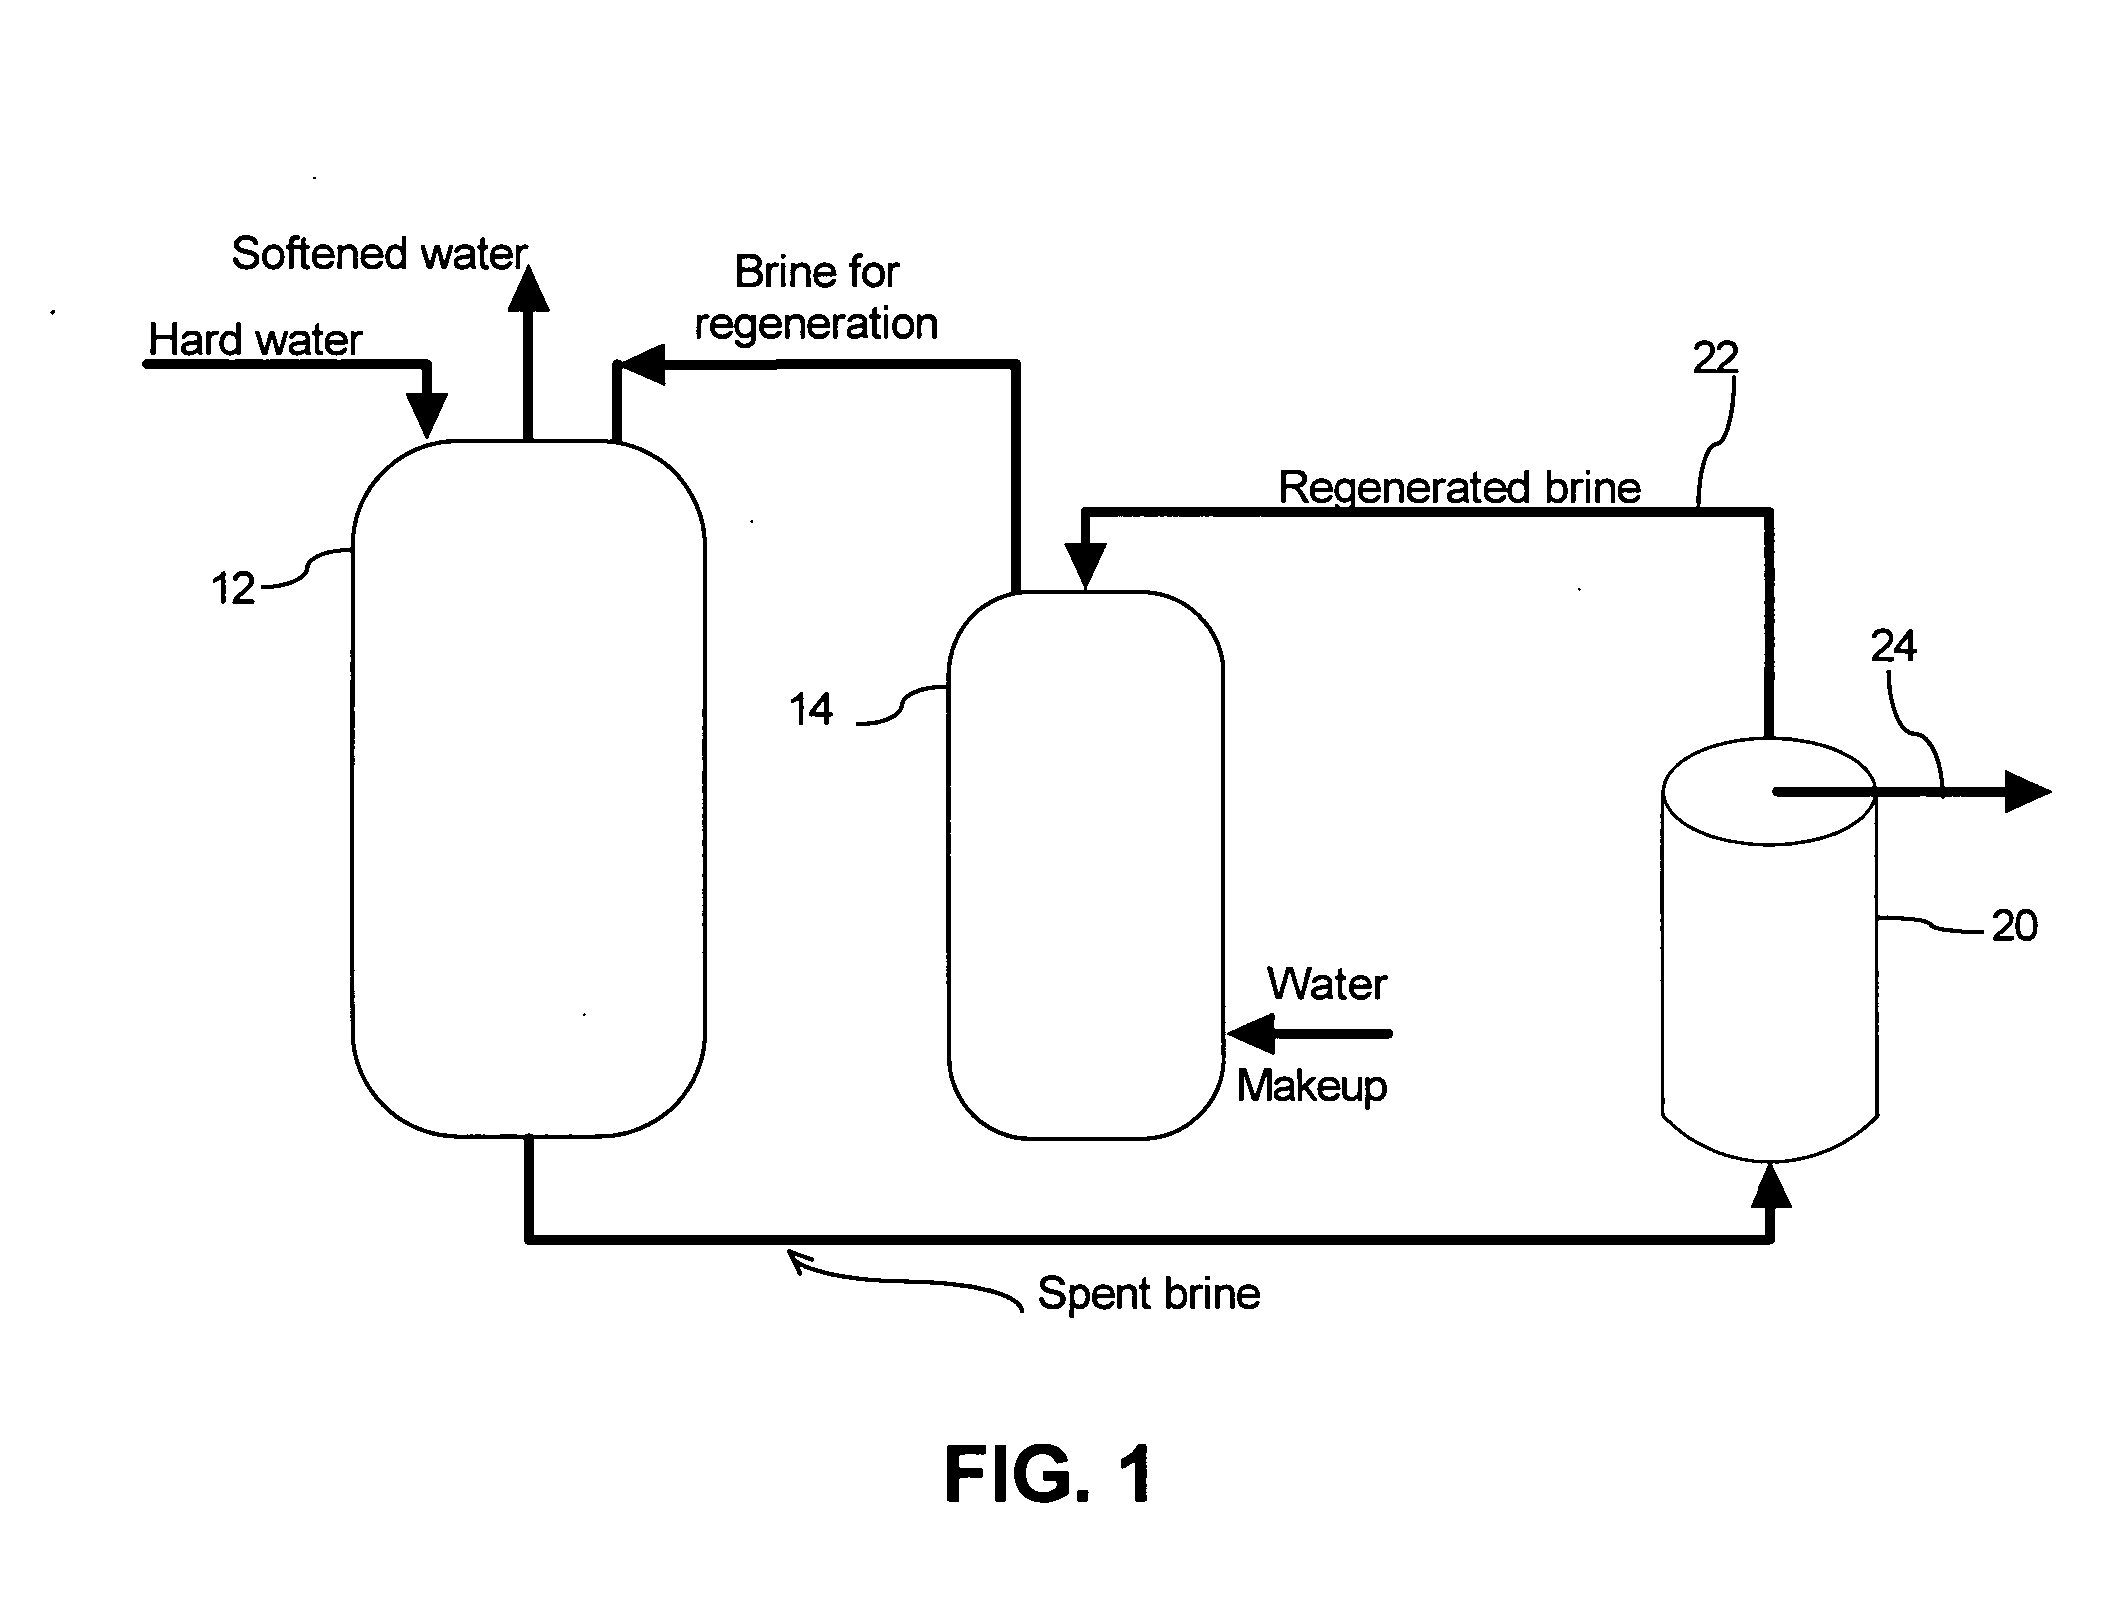 System for the purification and reuse of spent brine in a water softener